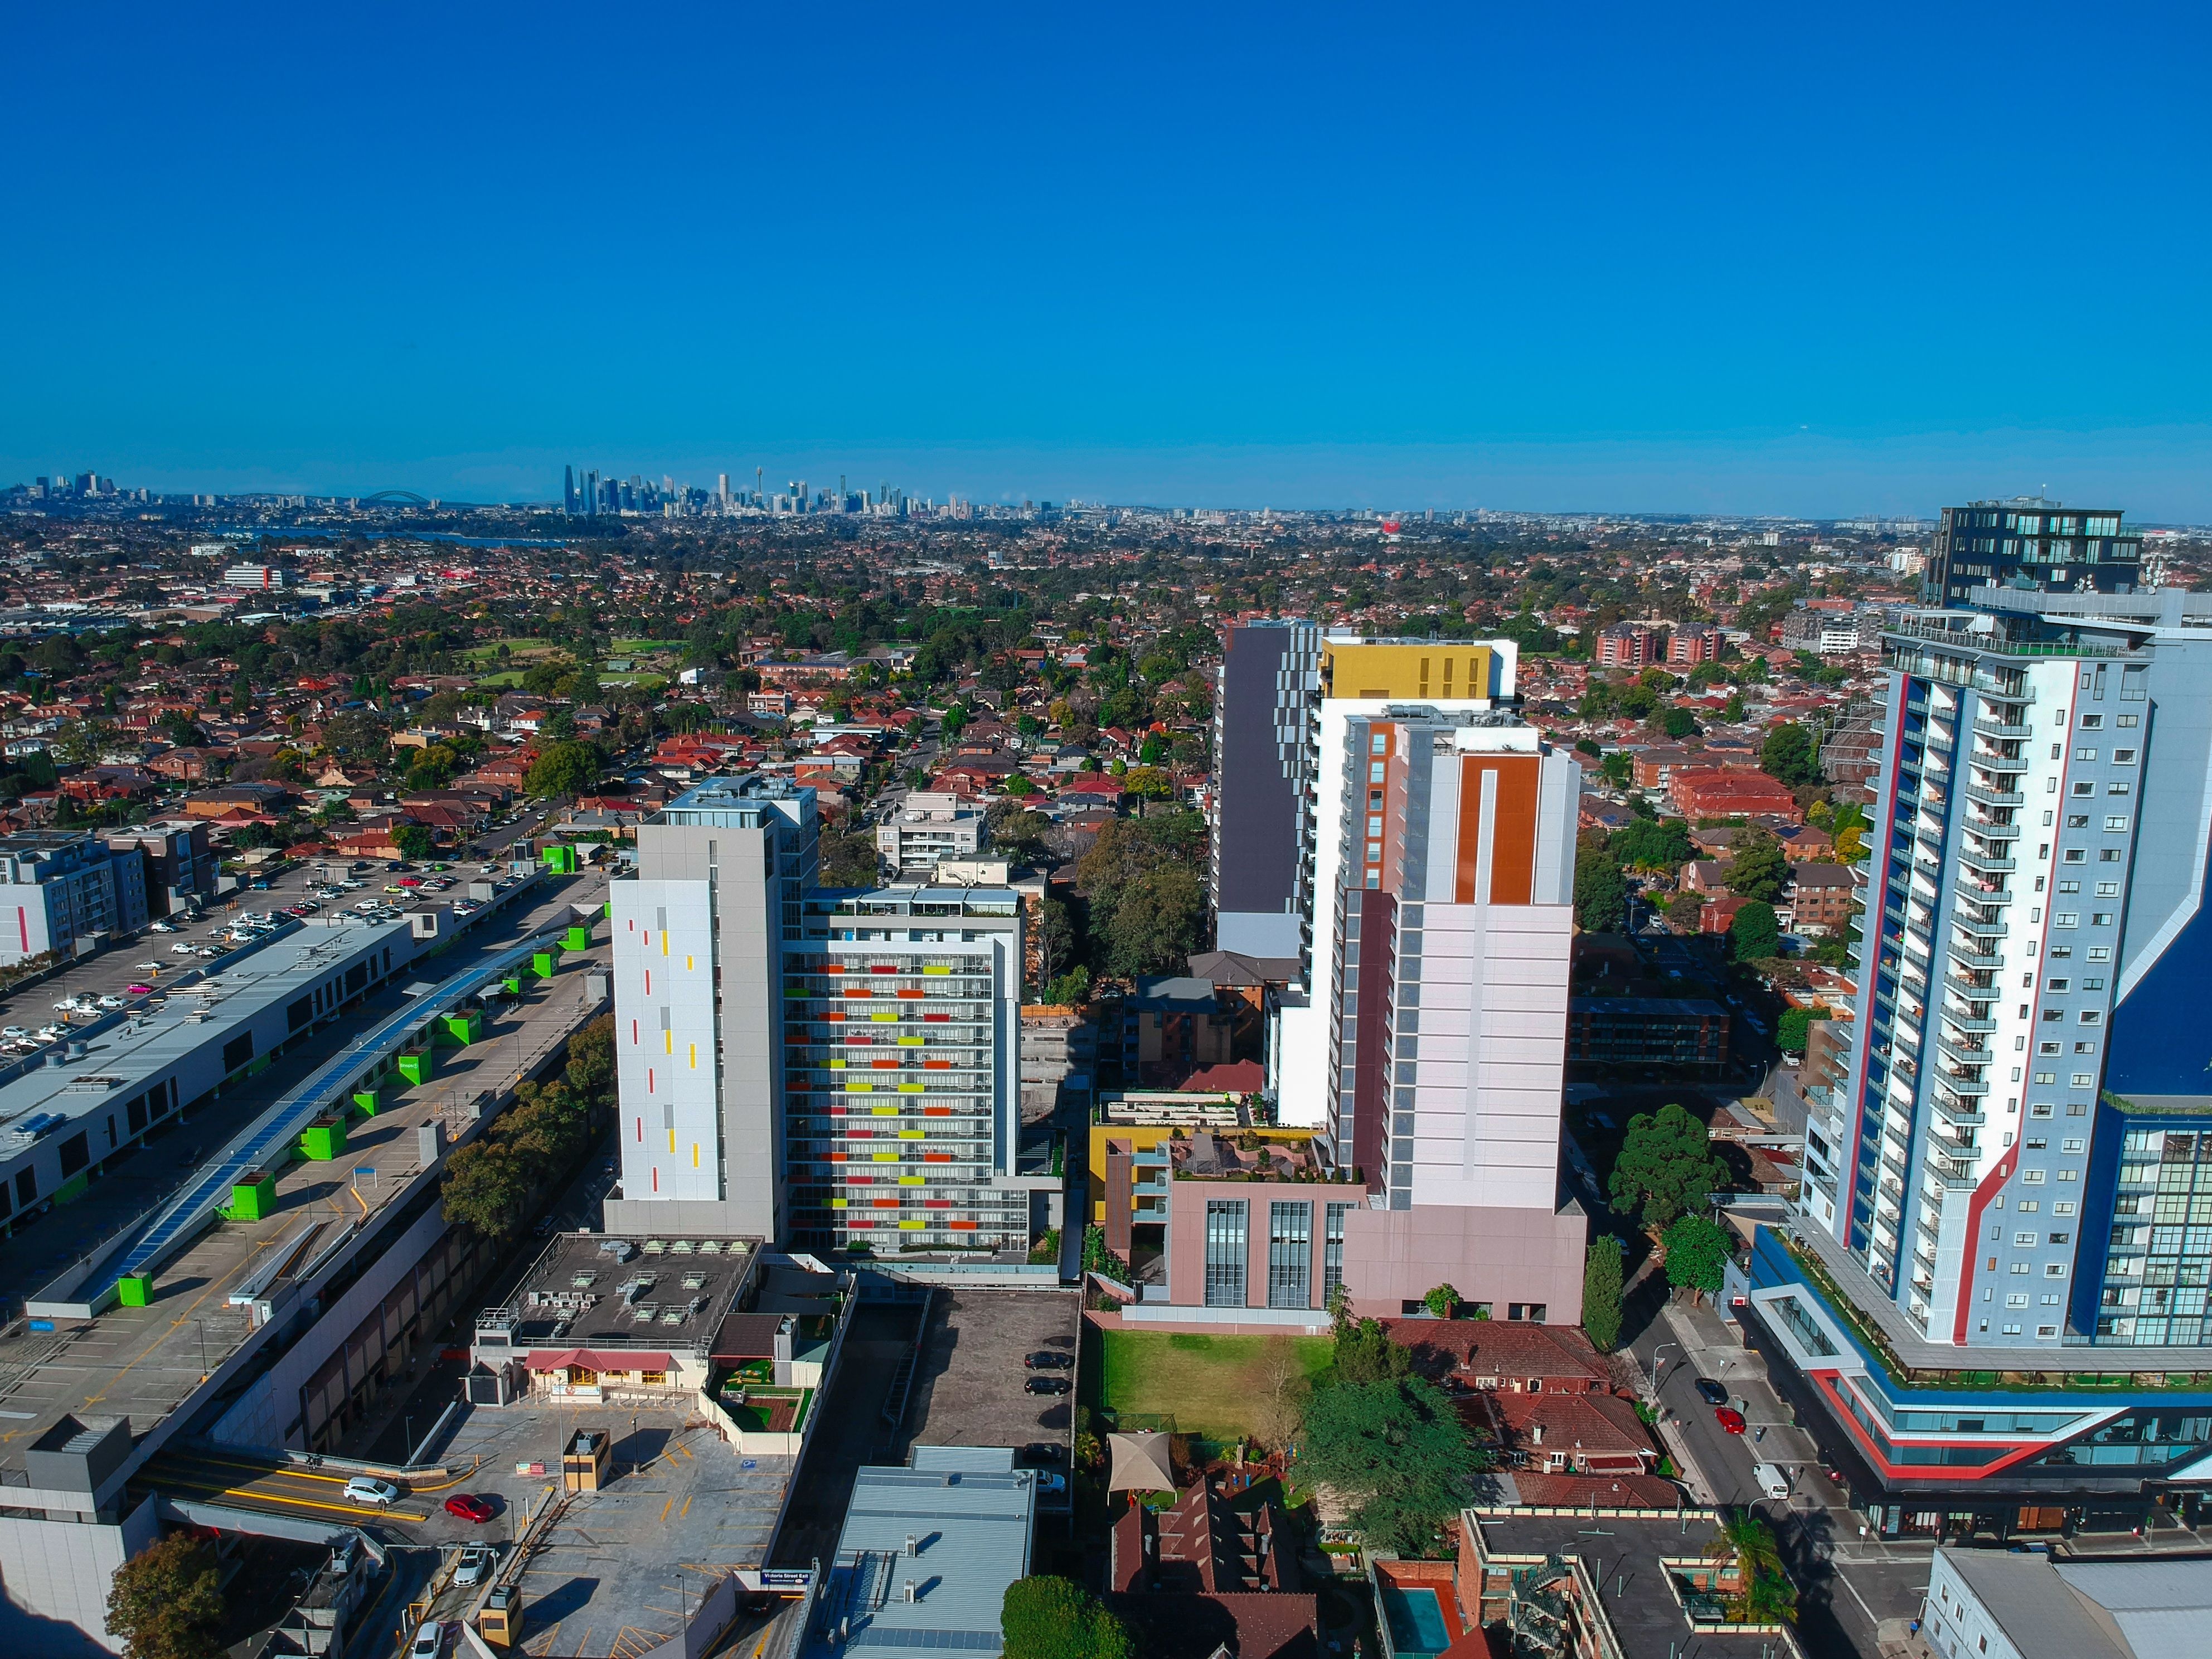 Drone view looking down on Commercial Suburb of Burwood in Sydney residential houses in suburbia suburban house roof tops and streets park NSW Australia